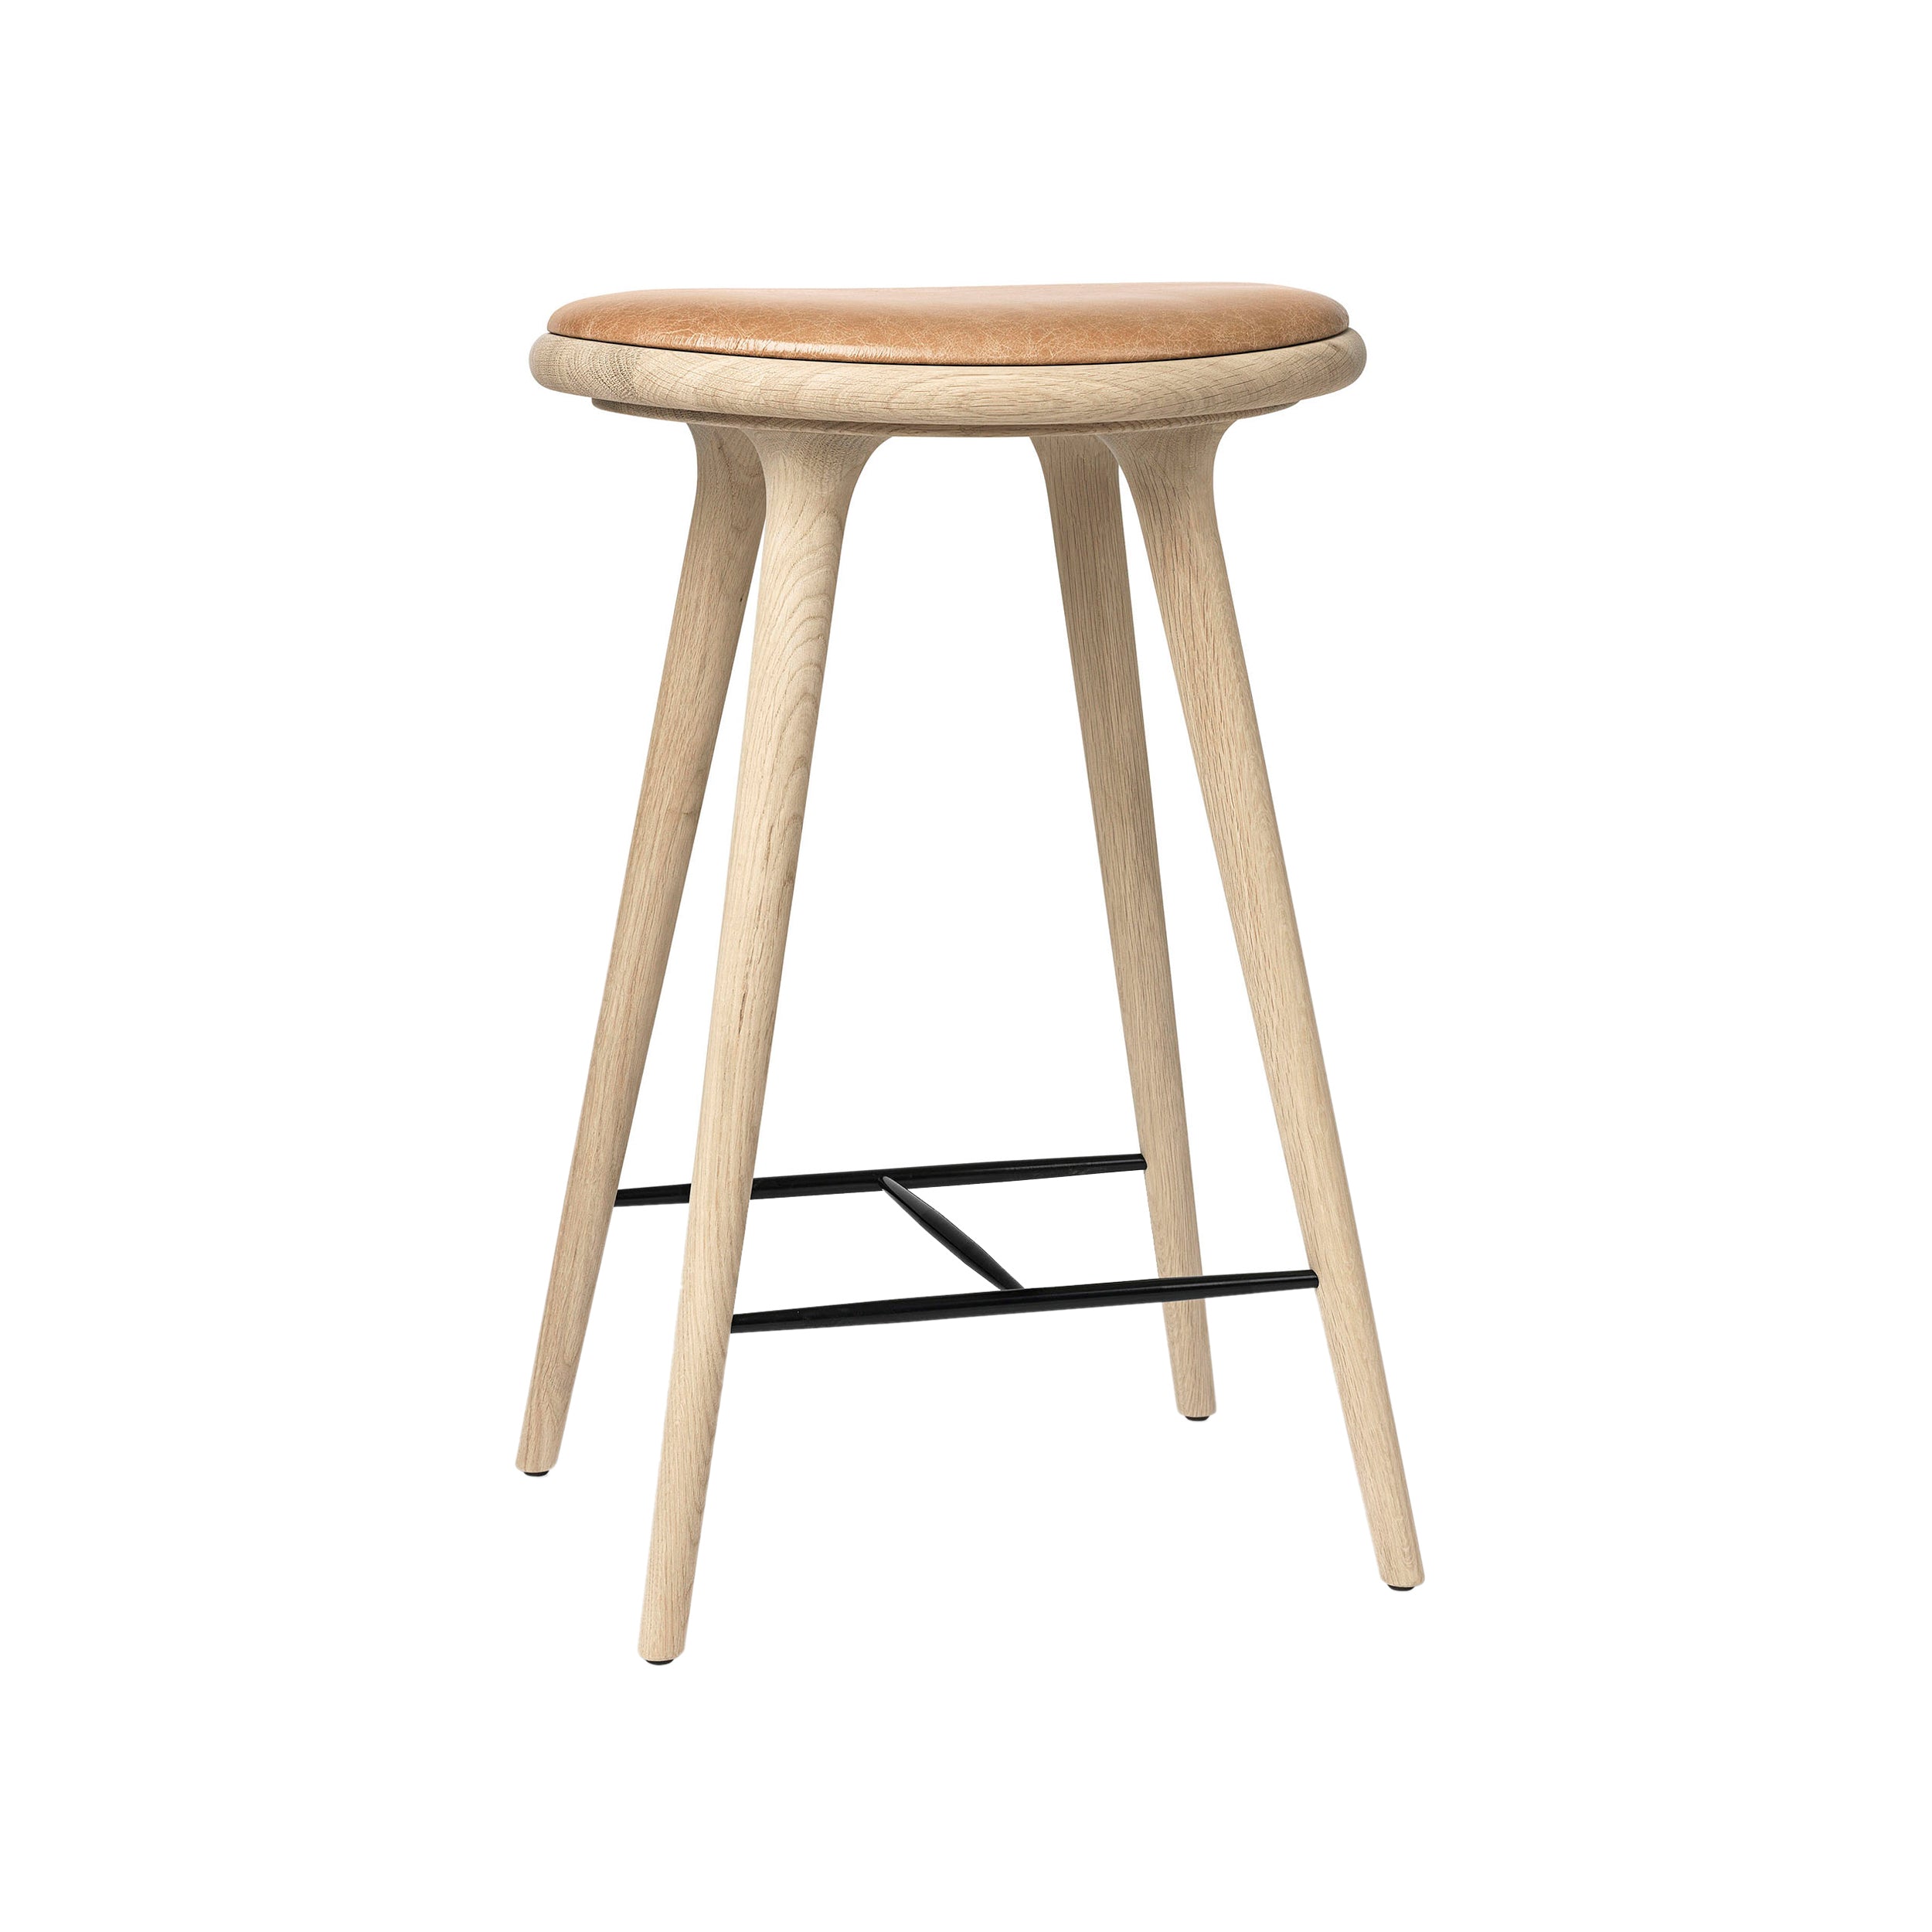 High Stool: Counter + Soaped Oak + Natural Tanned Leather